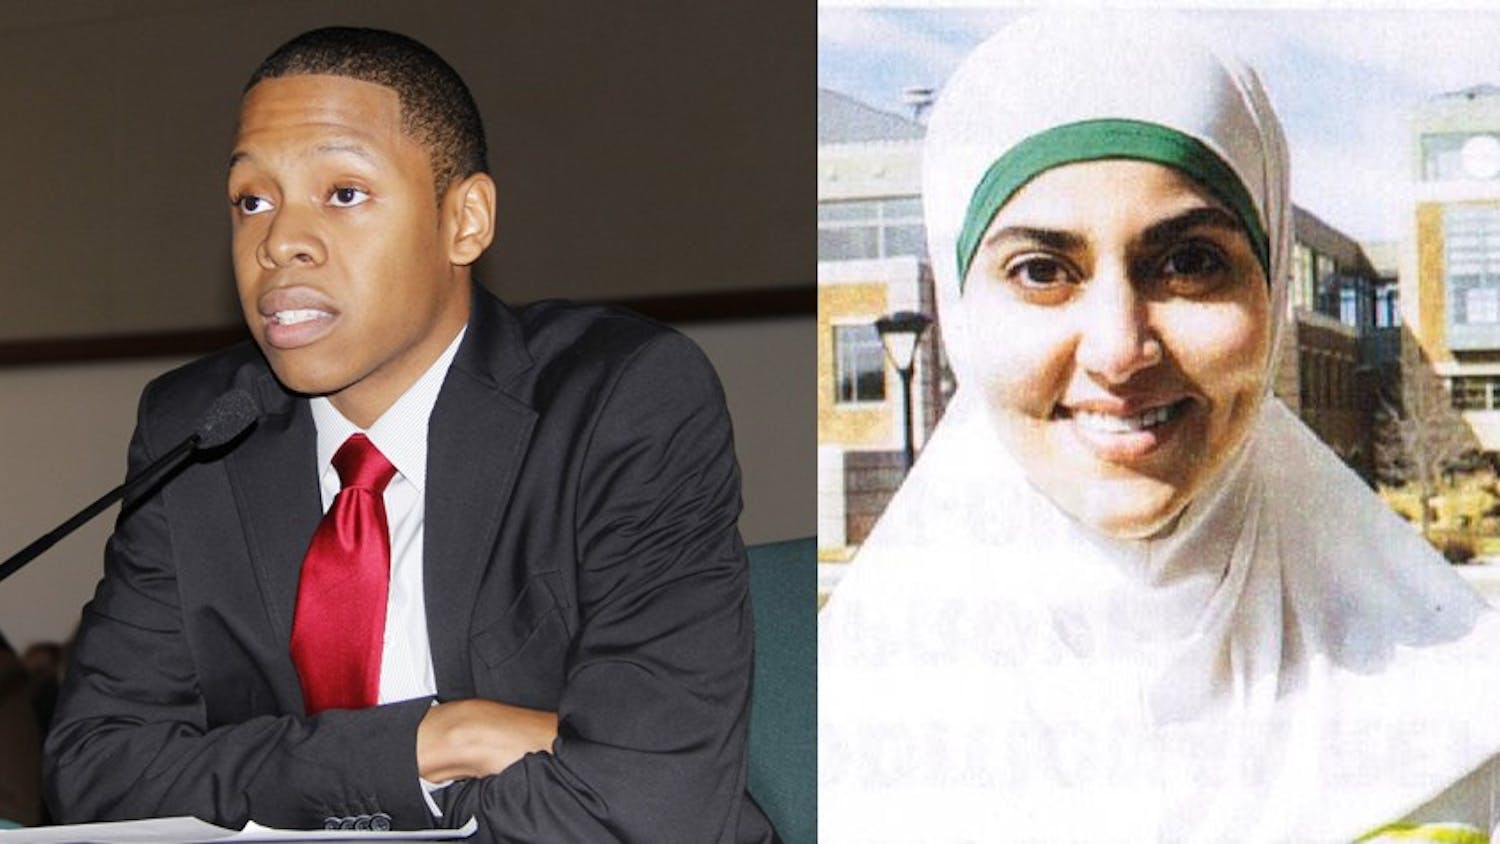 	Student Government’s credibility has been called into question after the race between incumbent Desmond Miller (Left) and write-in candidate Fatma Jaber (Right).